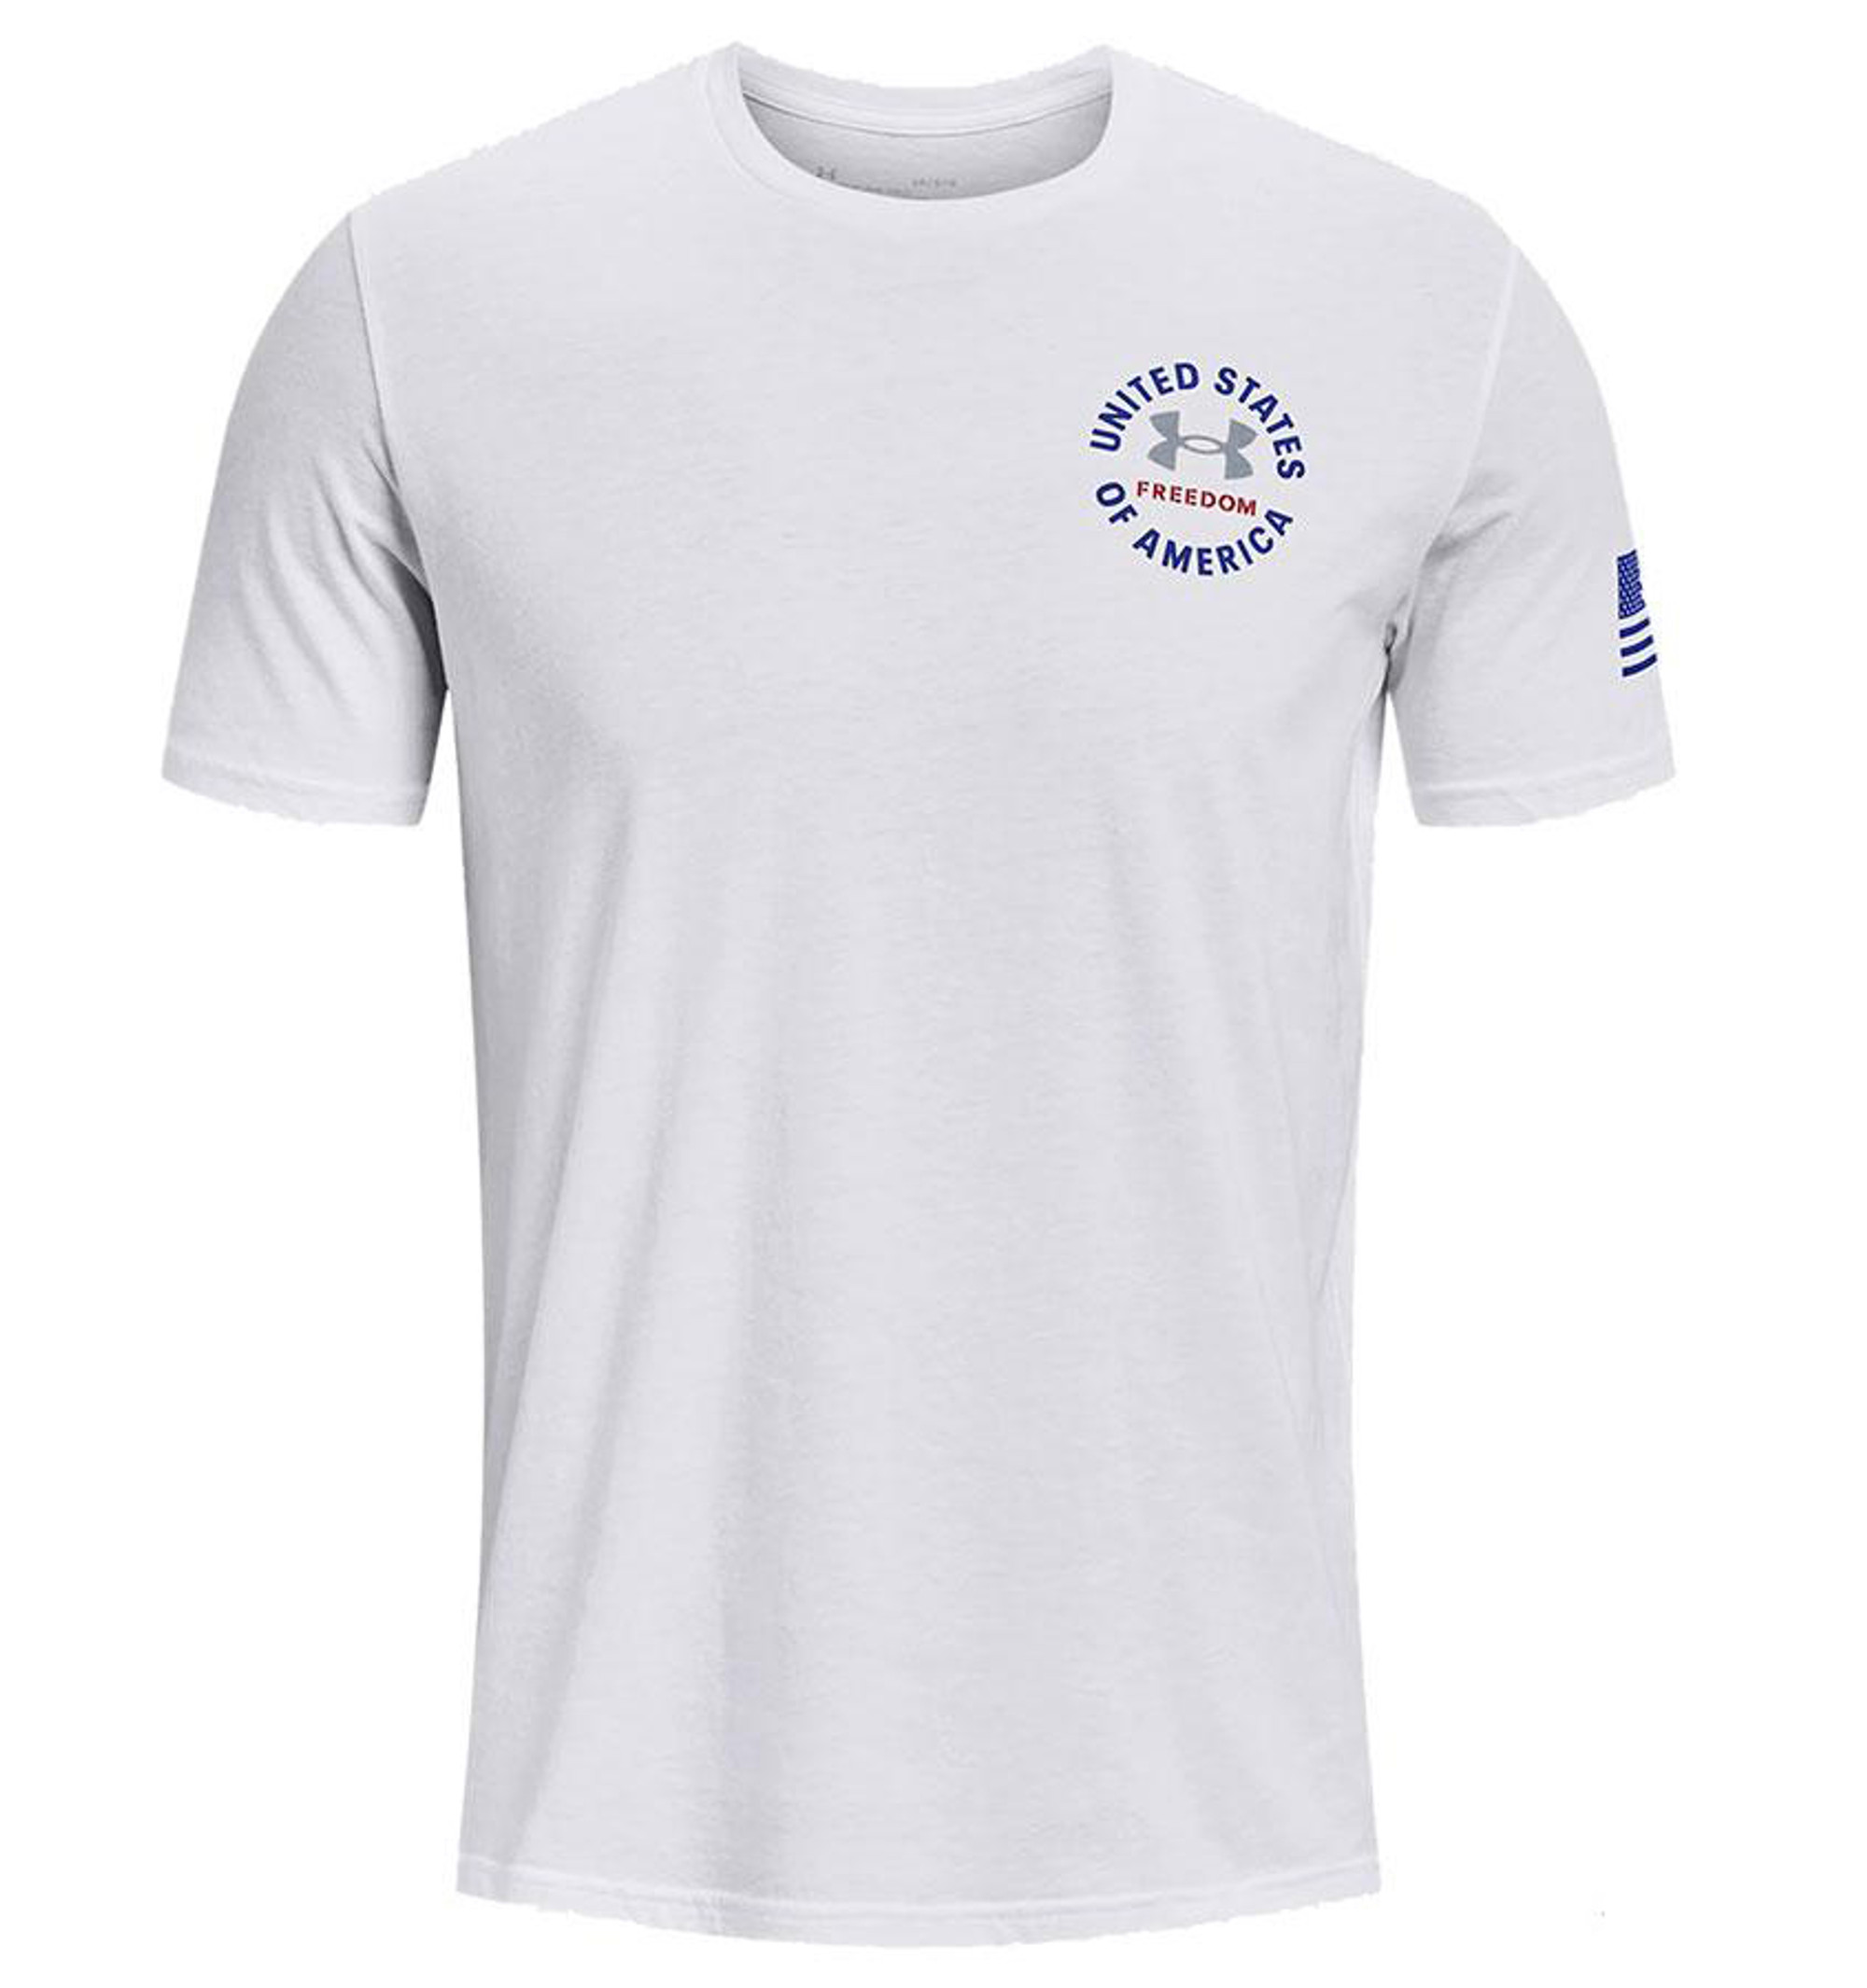 Under Armour Men's UA Freedom "Freedom USA" T-Shirt (Color: White / X-Large)